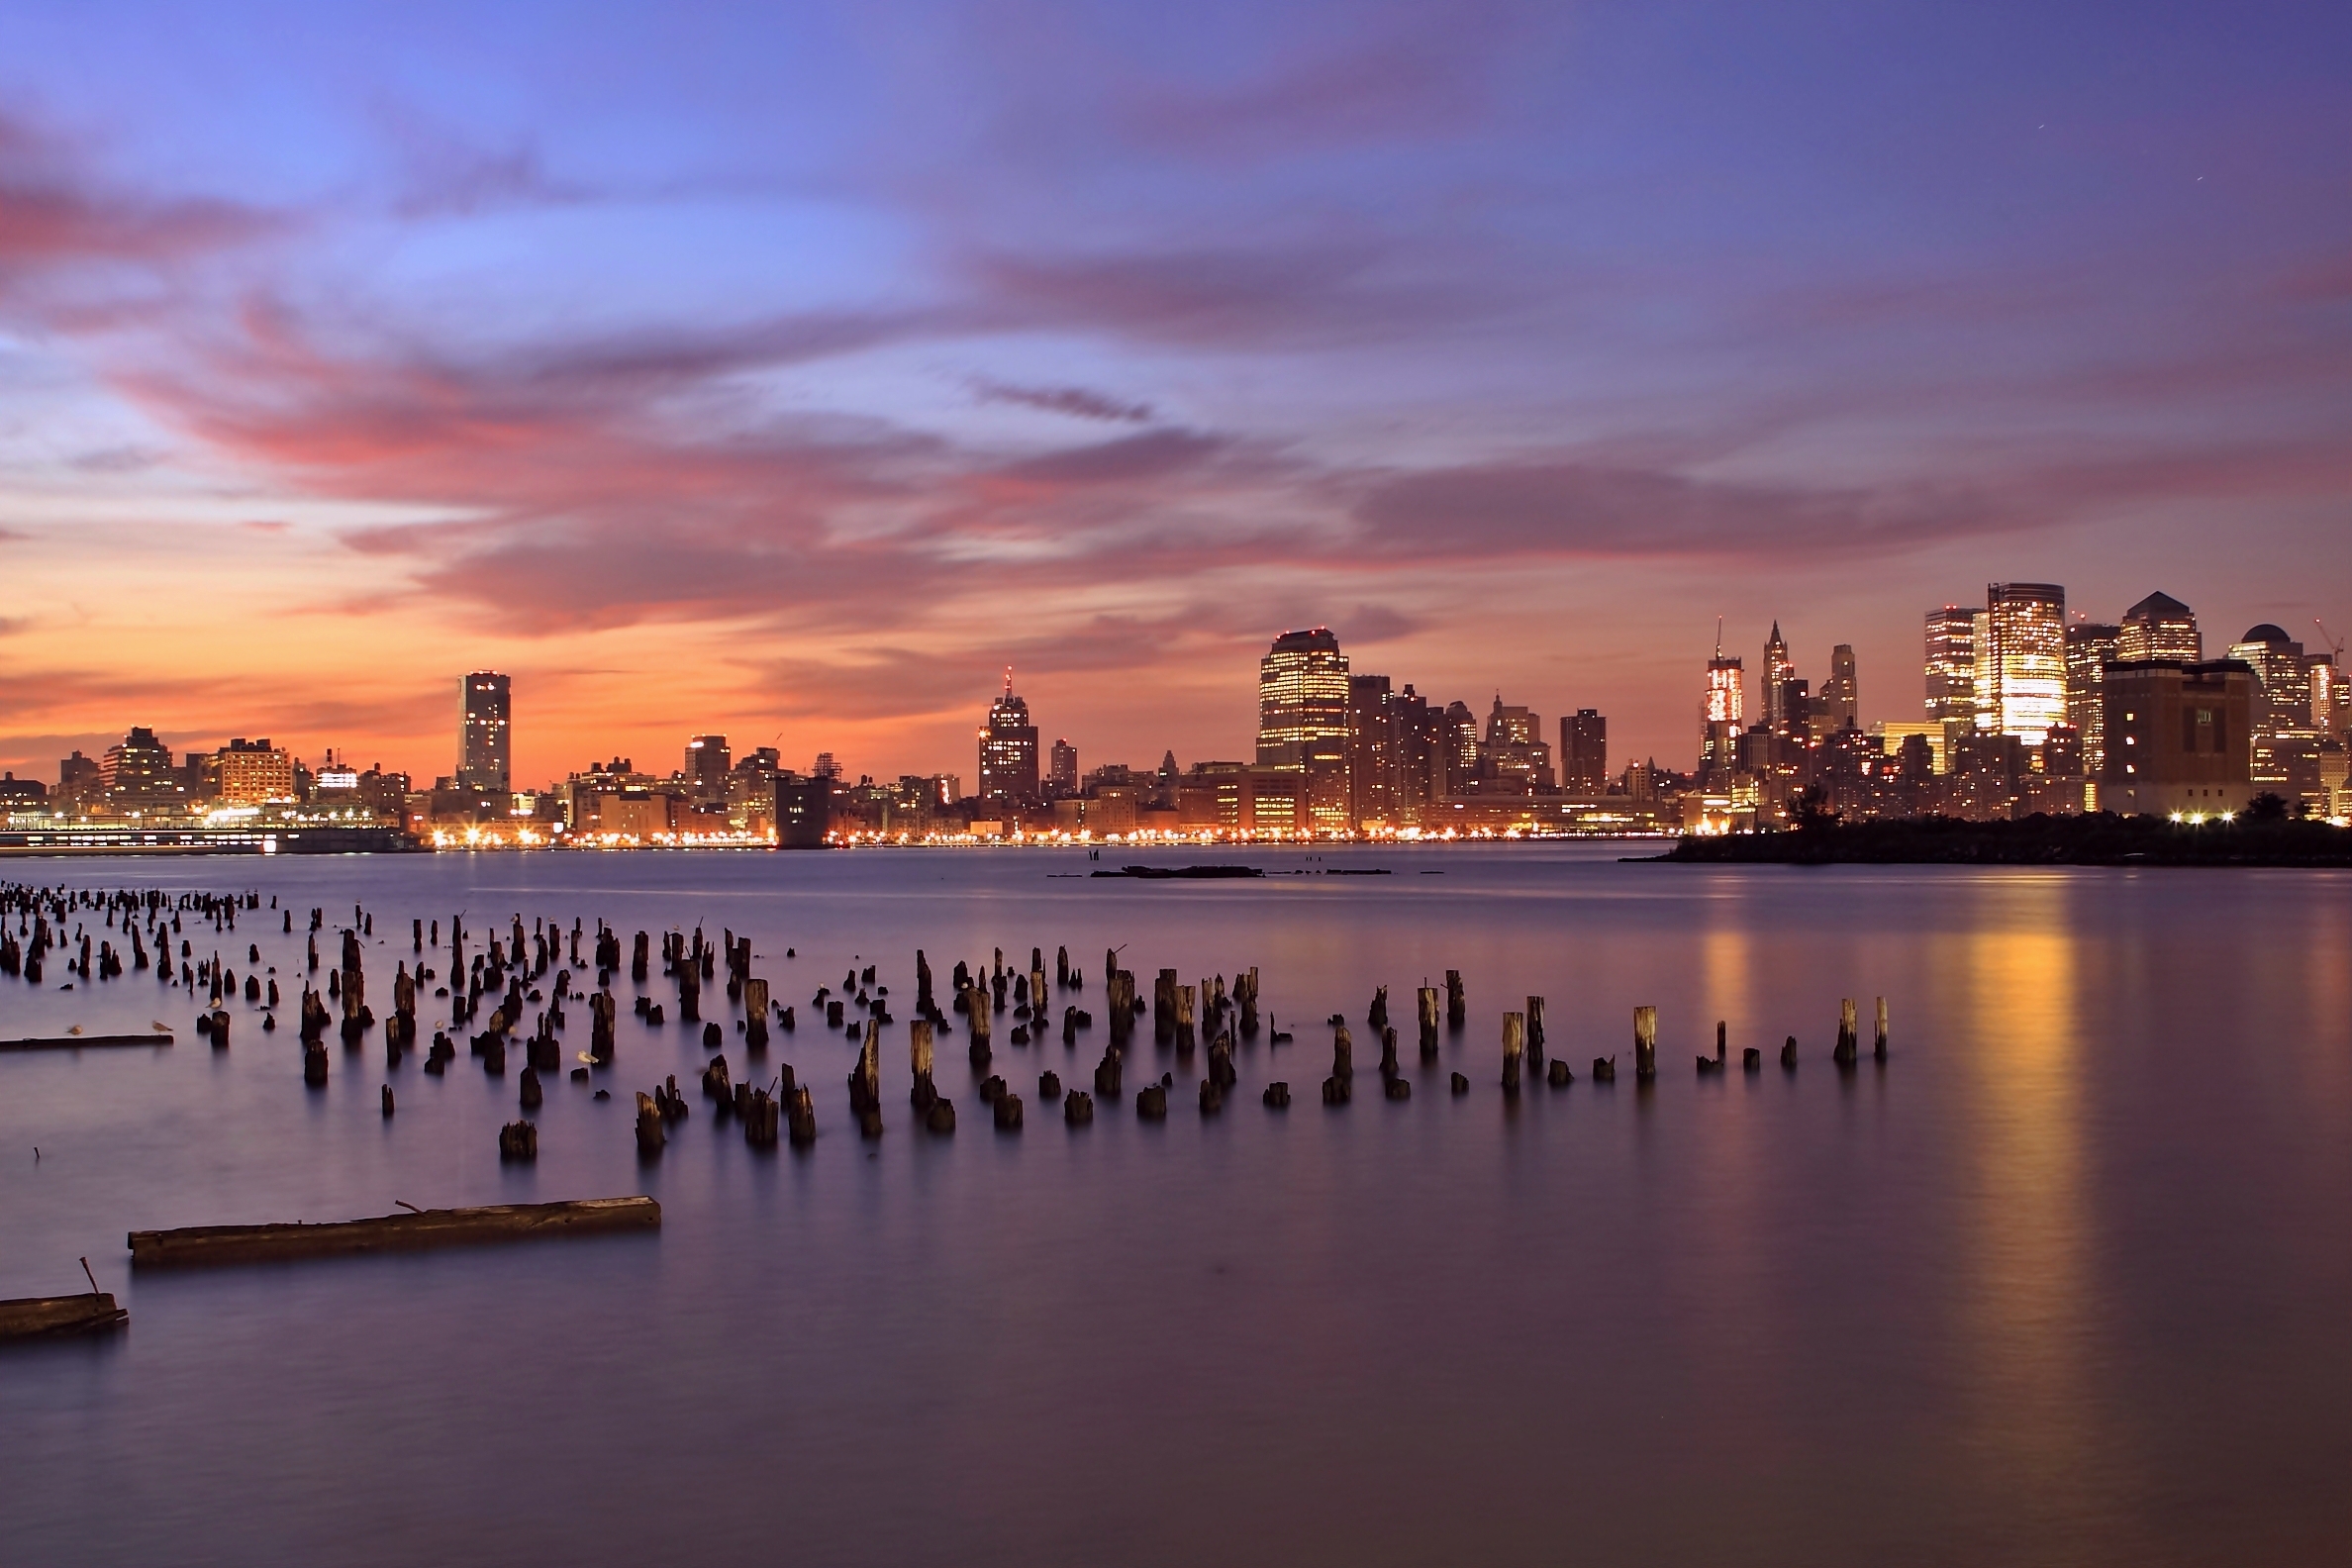 cities, rivers, sunset, sky, lilac, clouds, usa, orange, lights, wooden, skyscrapers, backlight, illumination, evening, united states, pillars, jersey city, state of new jersey, new jersey state, hudson, columns